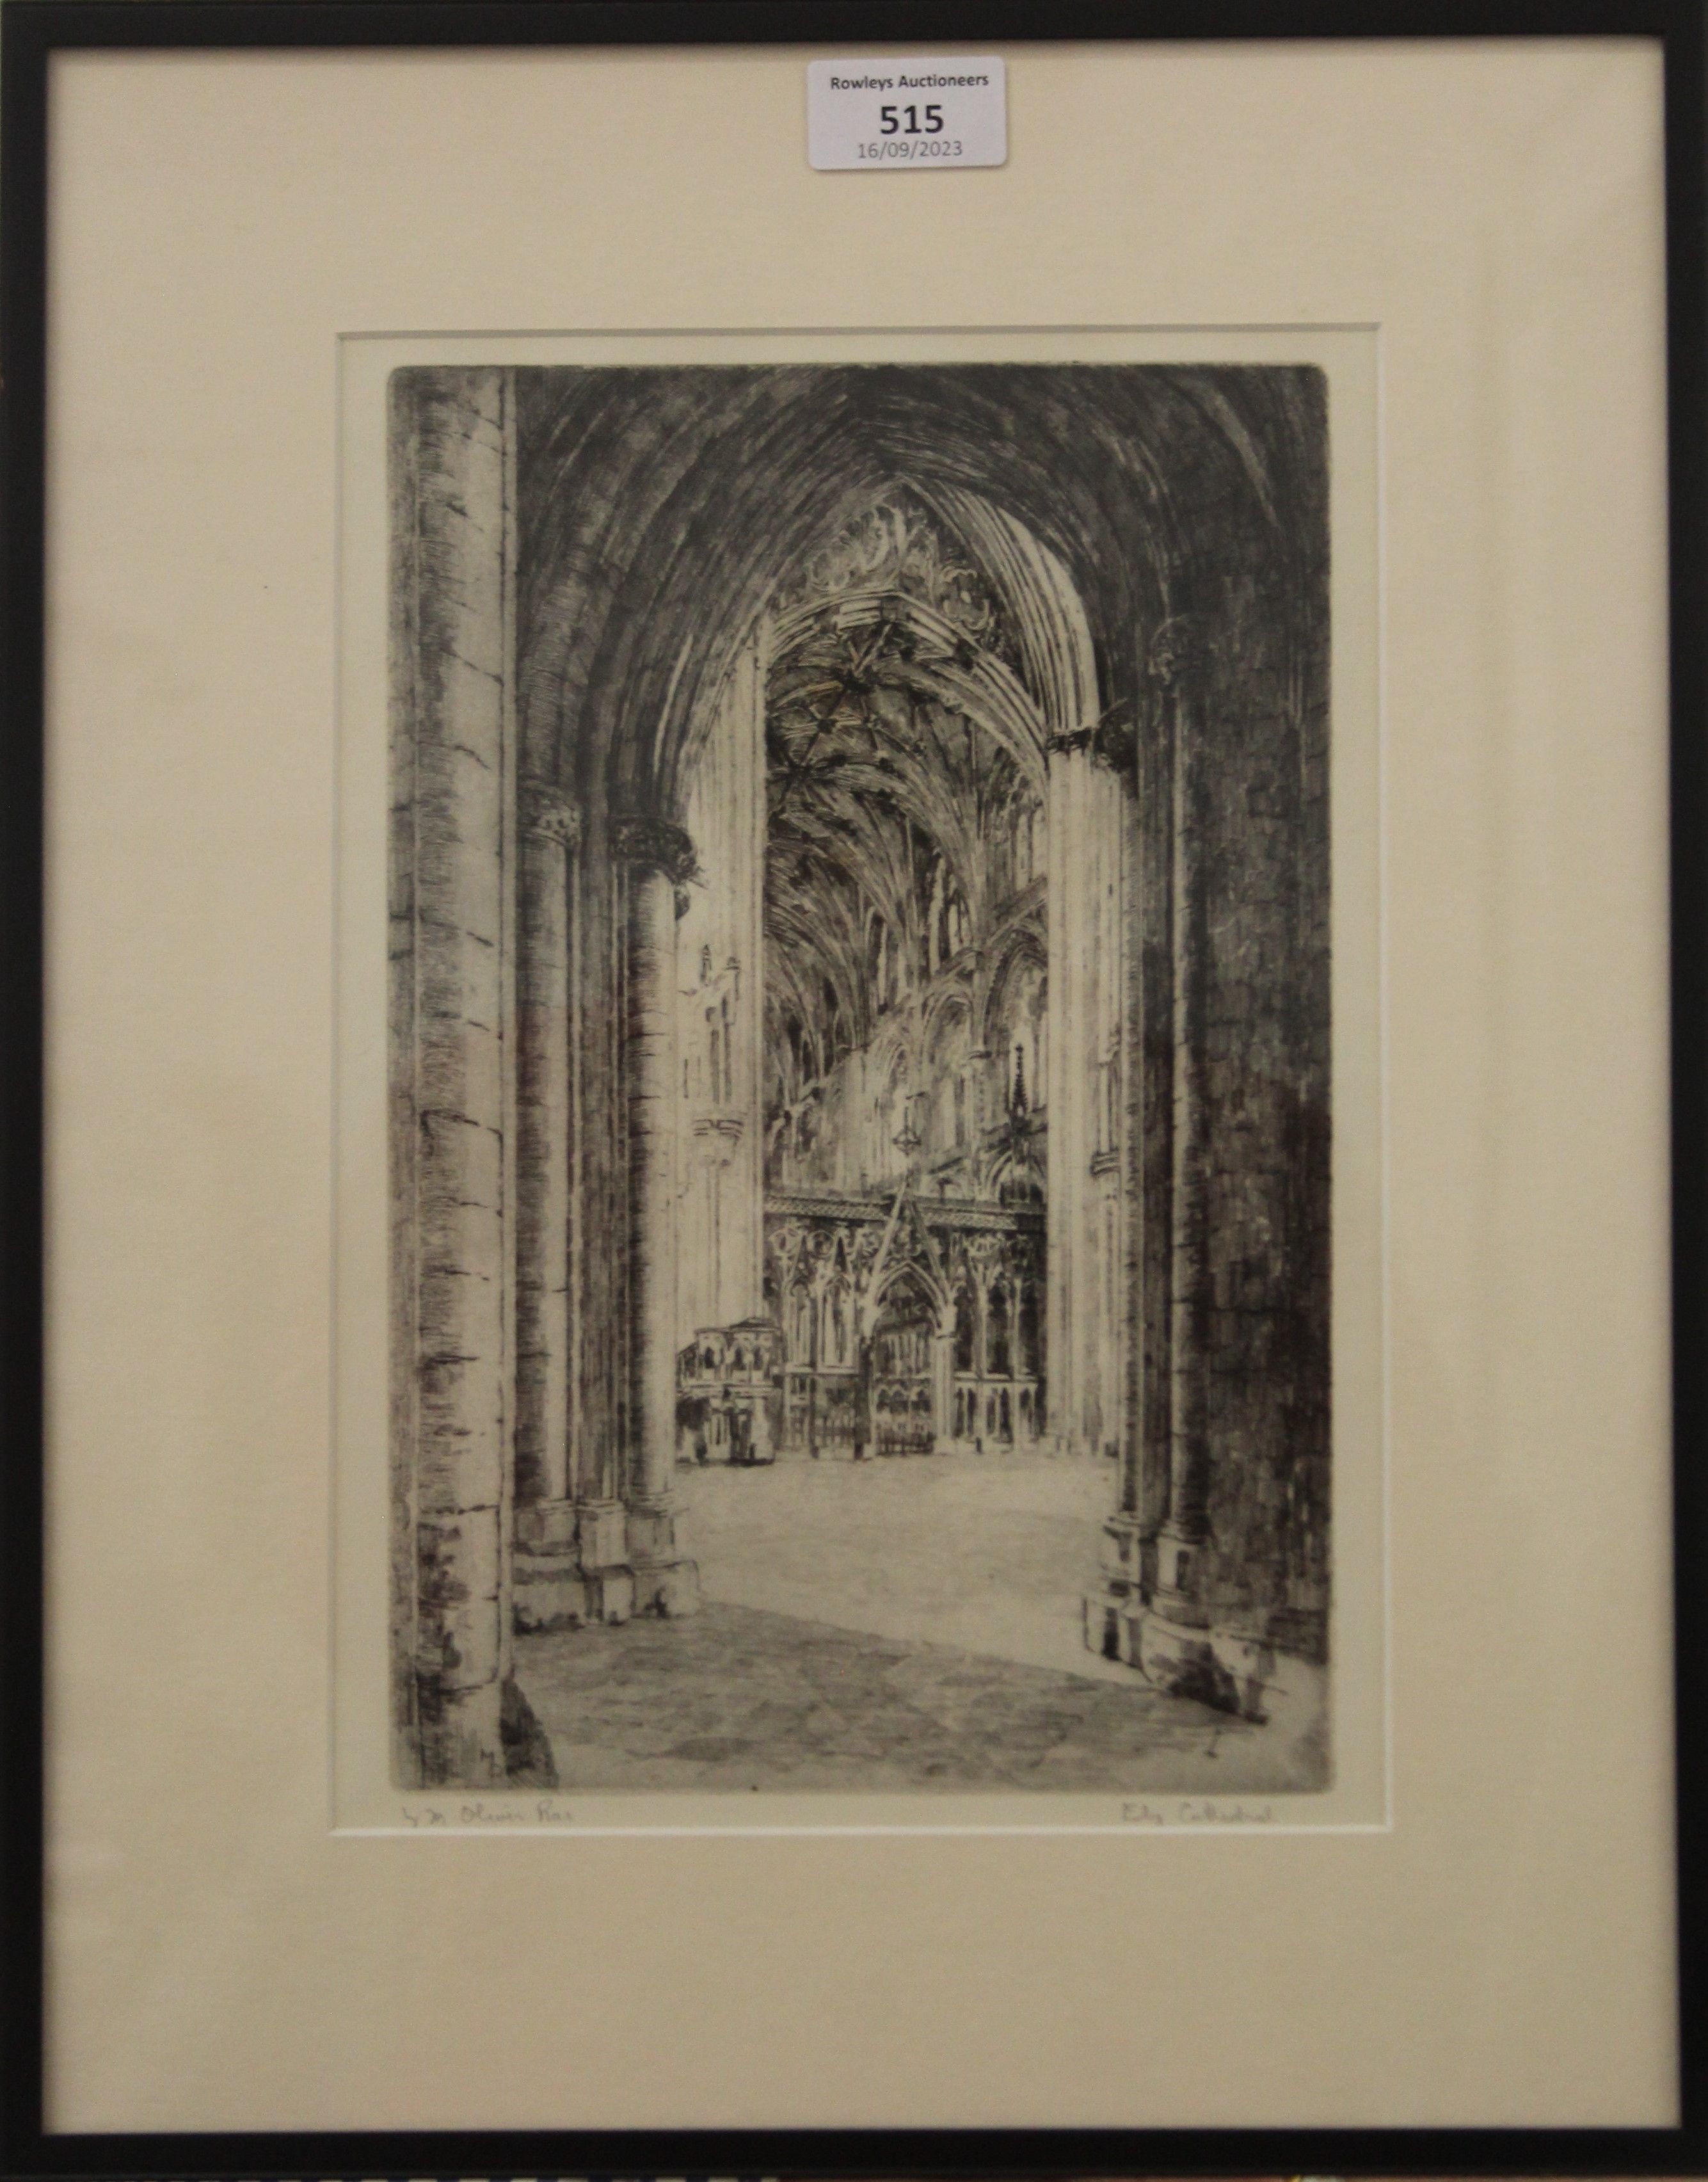 M OLIVER RAE, an etching of Ely Cathedral, framed and glazed. 20 x 28.5 cm. - Image 2 of 3